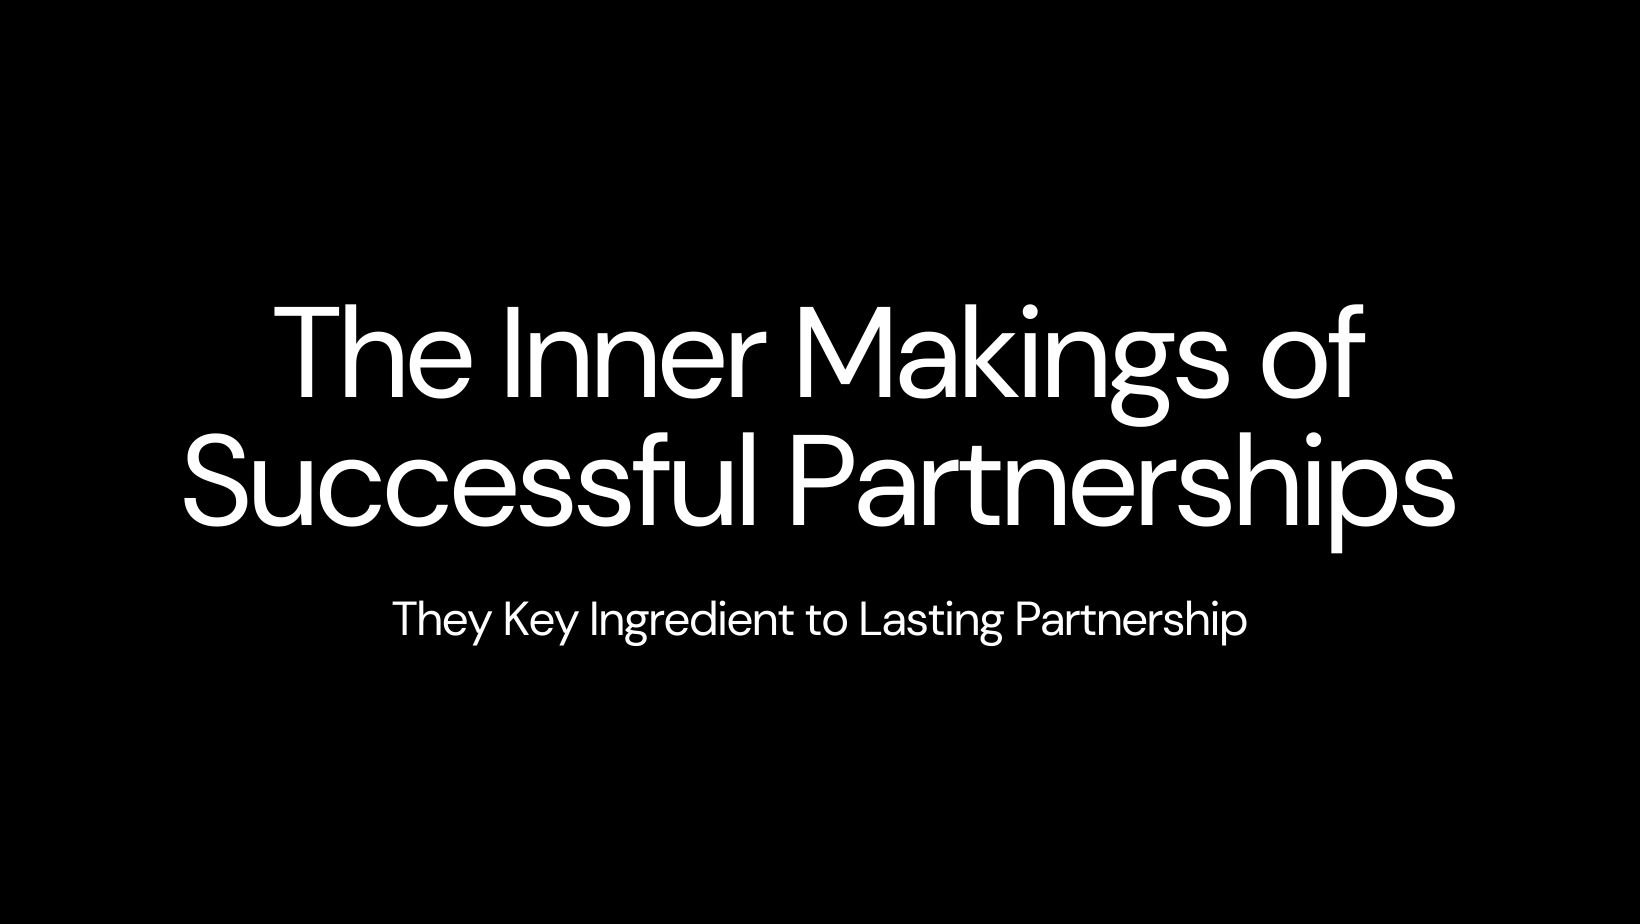 The Inner Makings of Successful Partnerships